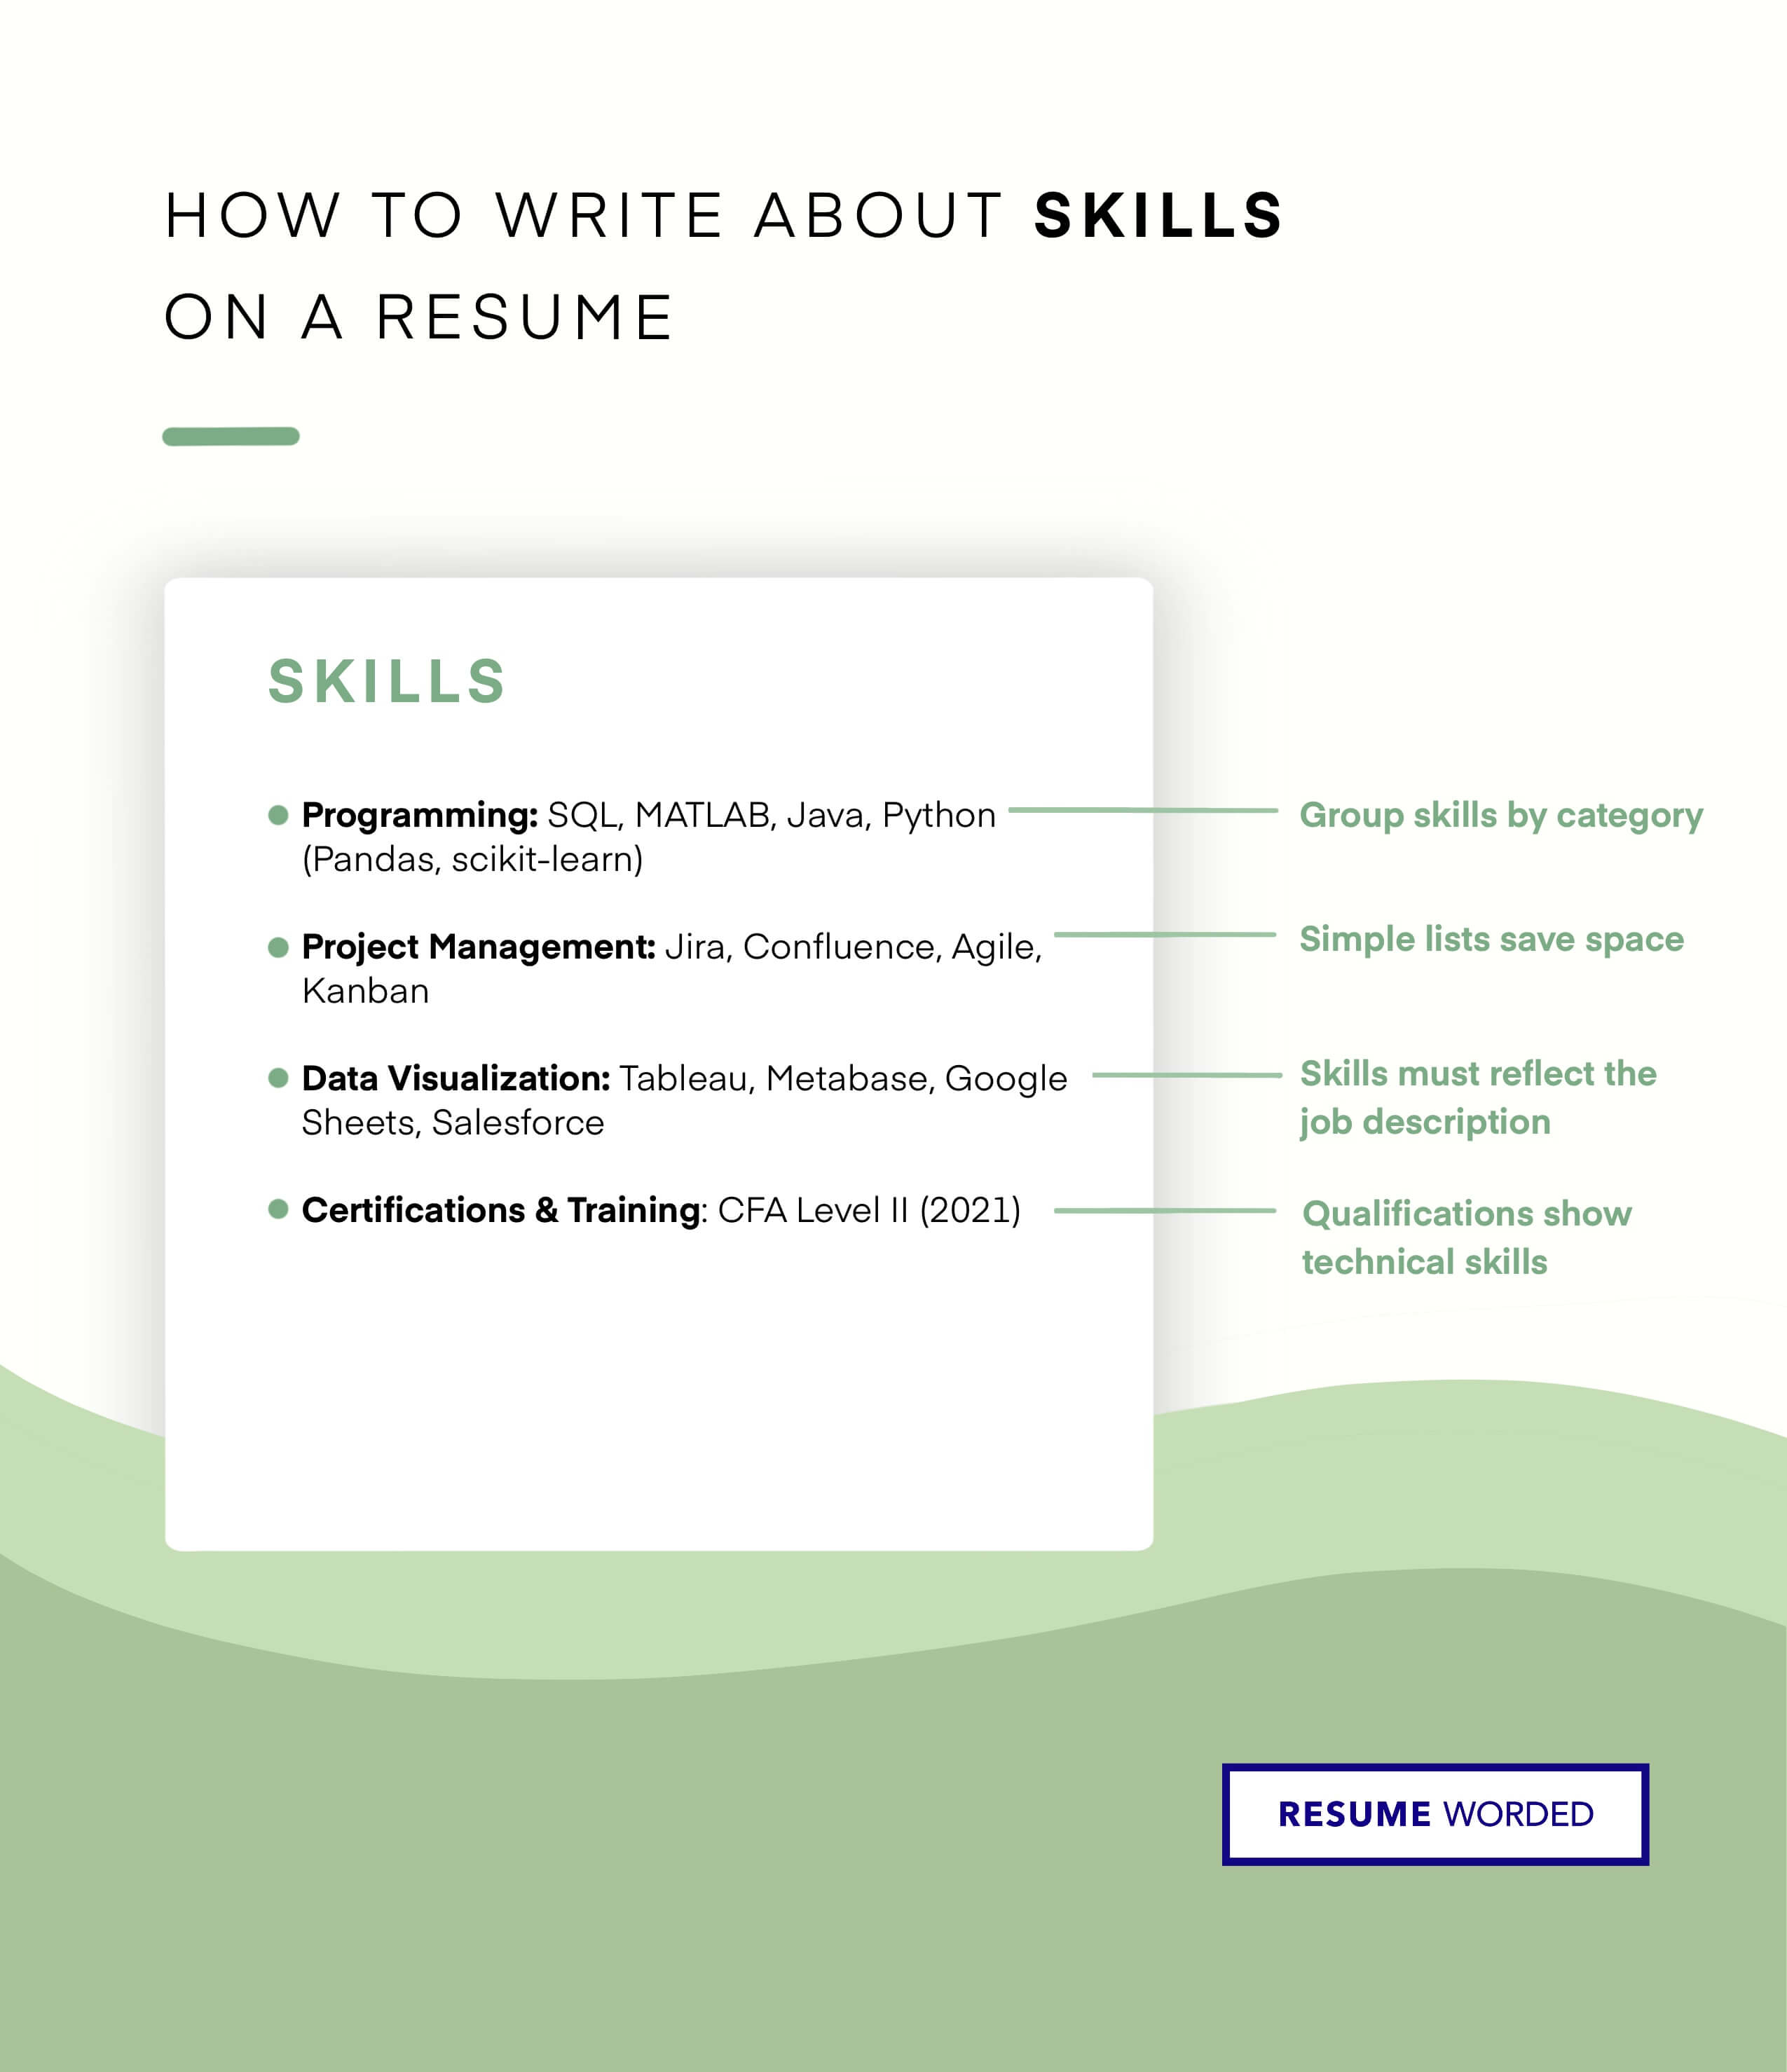 Hard PM and coordinator skills displayed in skills section - IT Project Coordinator Resume